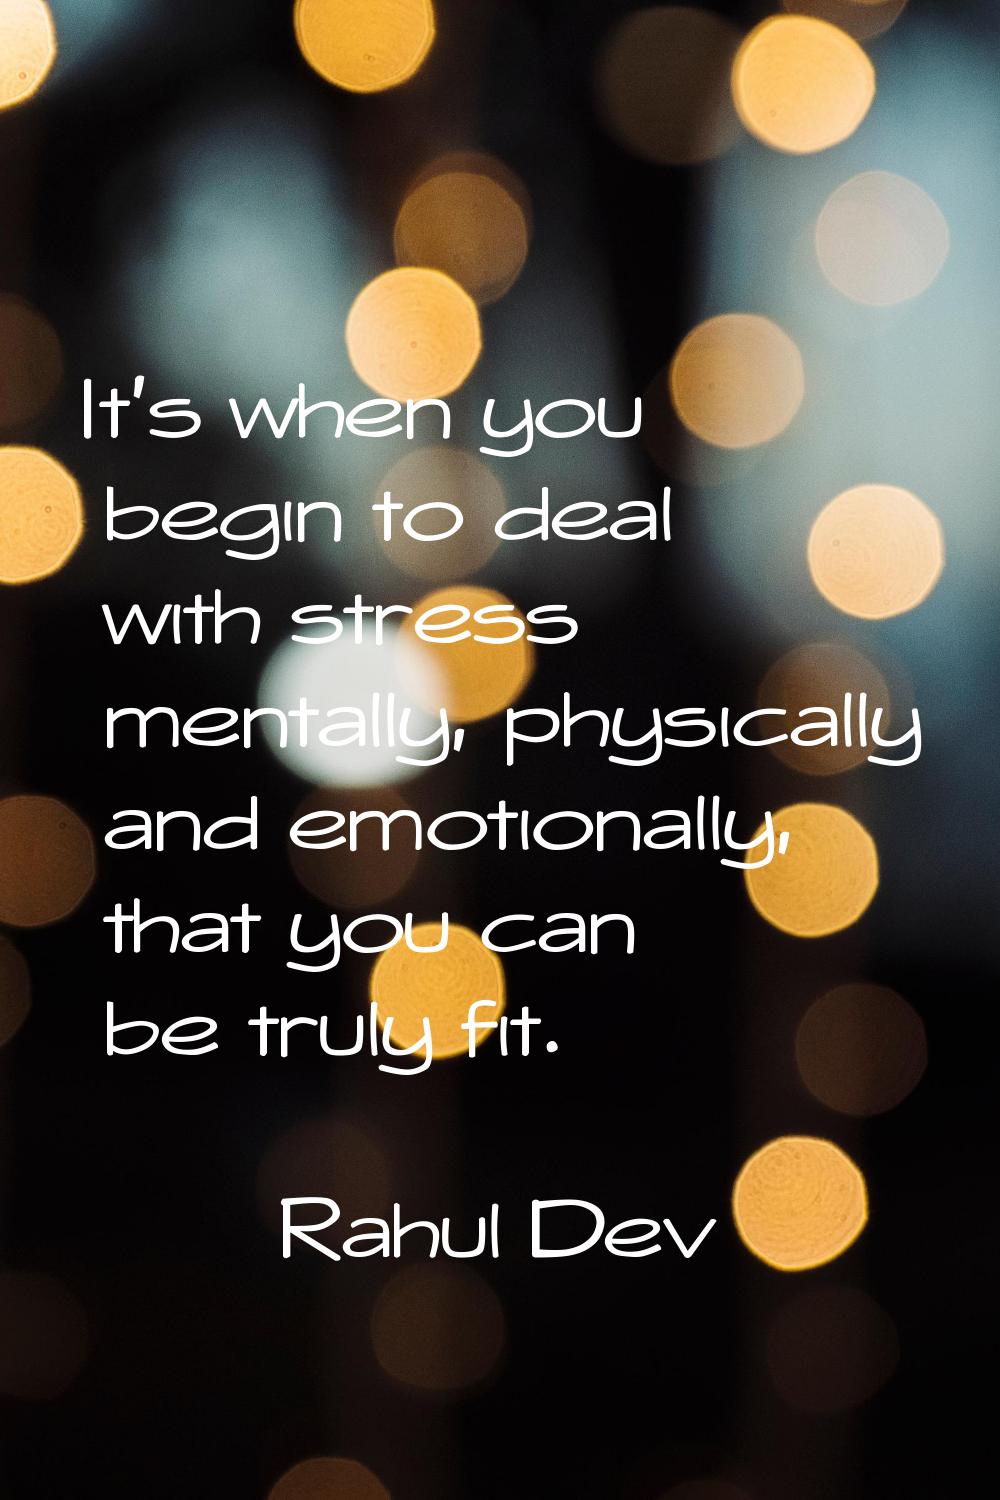 It's when you begin to deal with stress mentally, physically and emotionally, that you can be truly